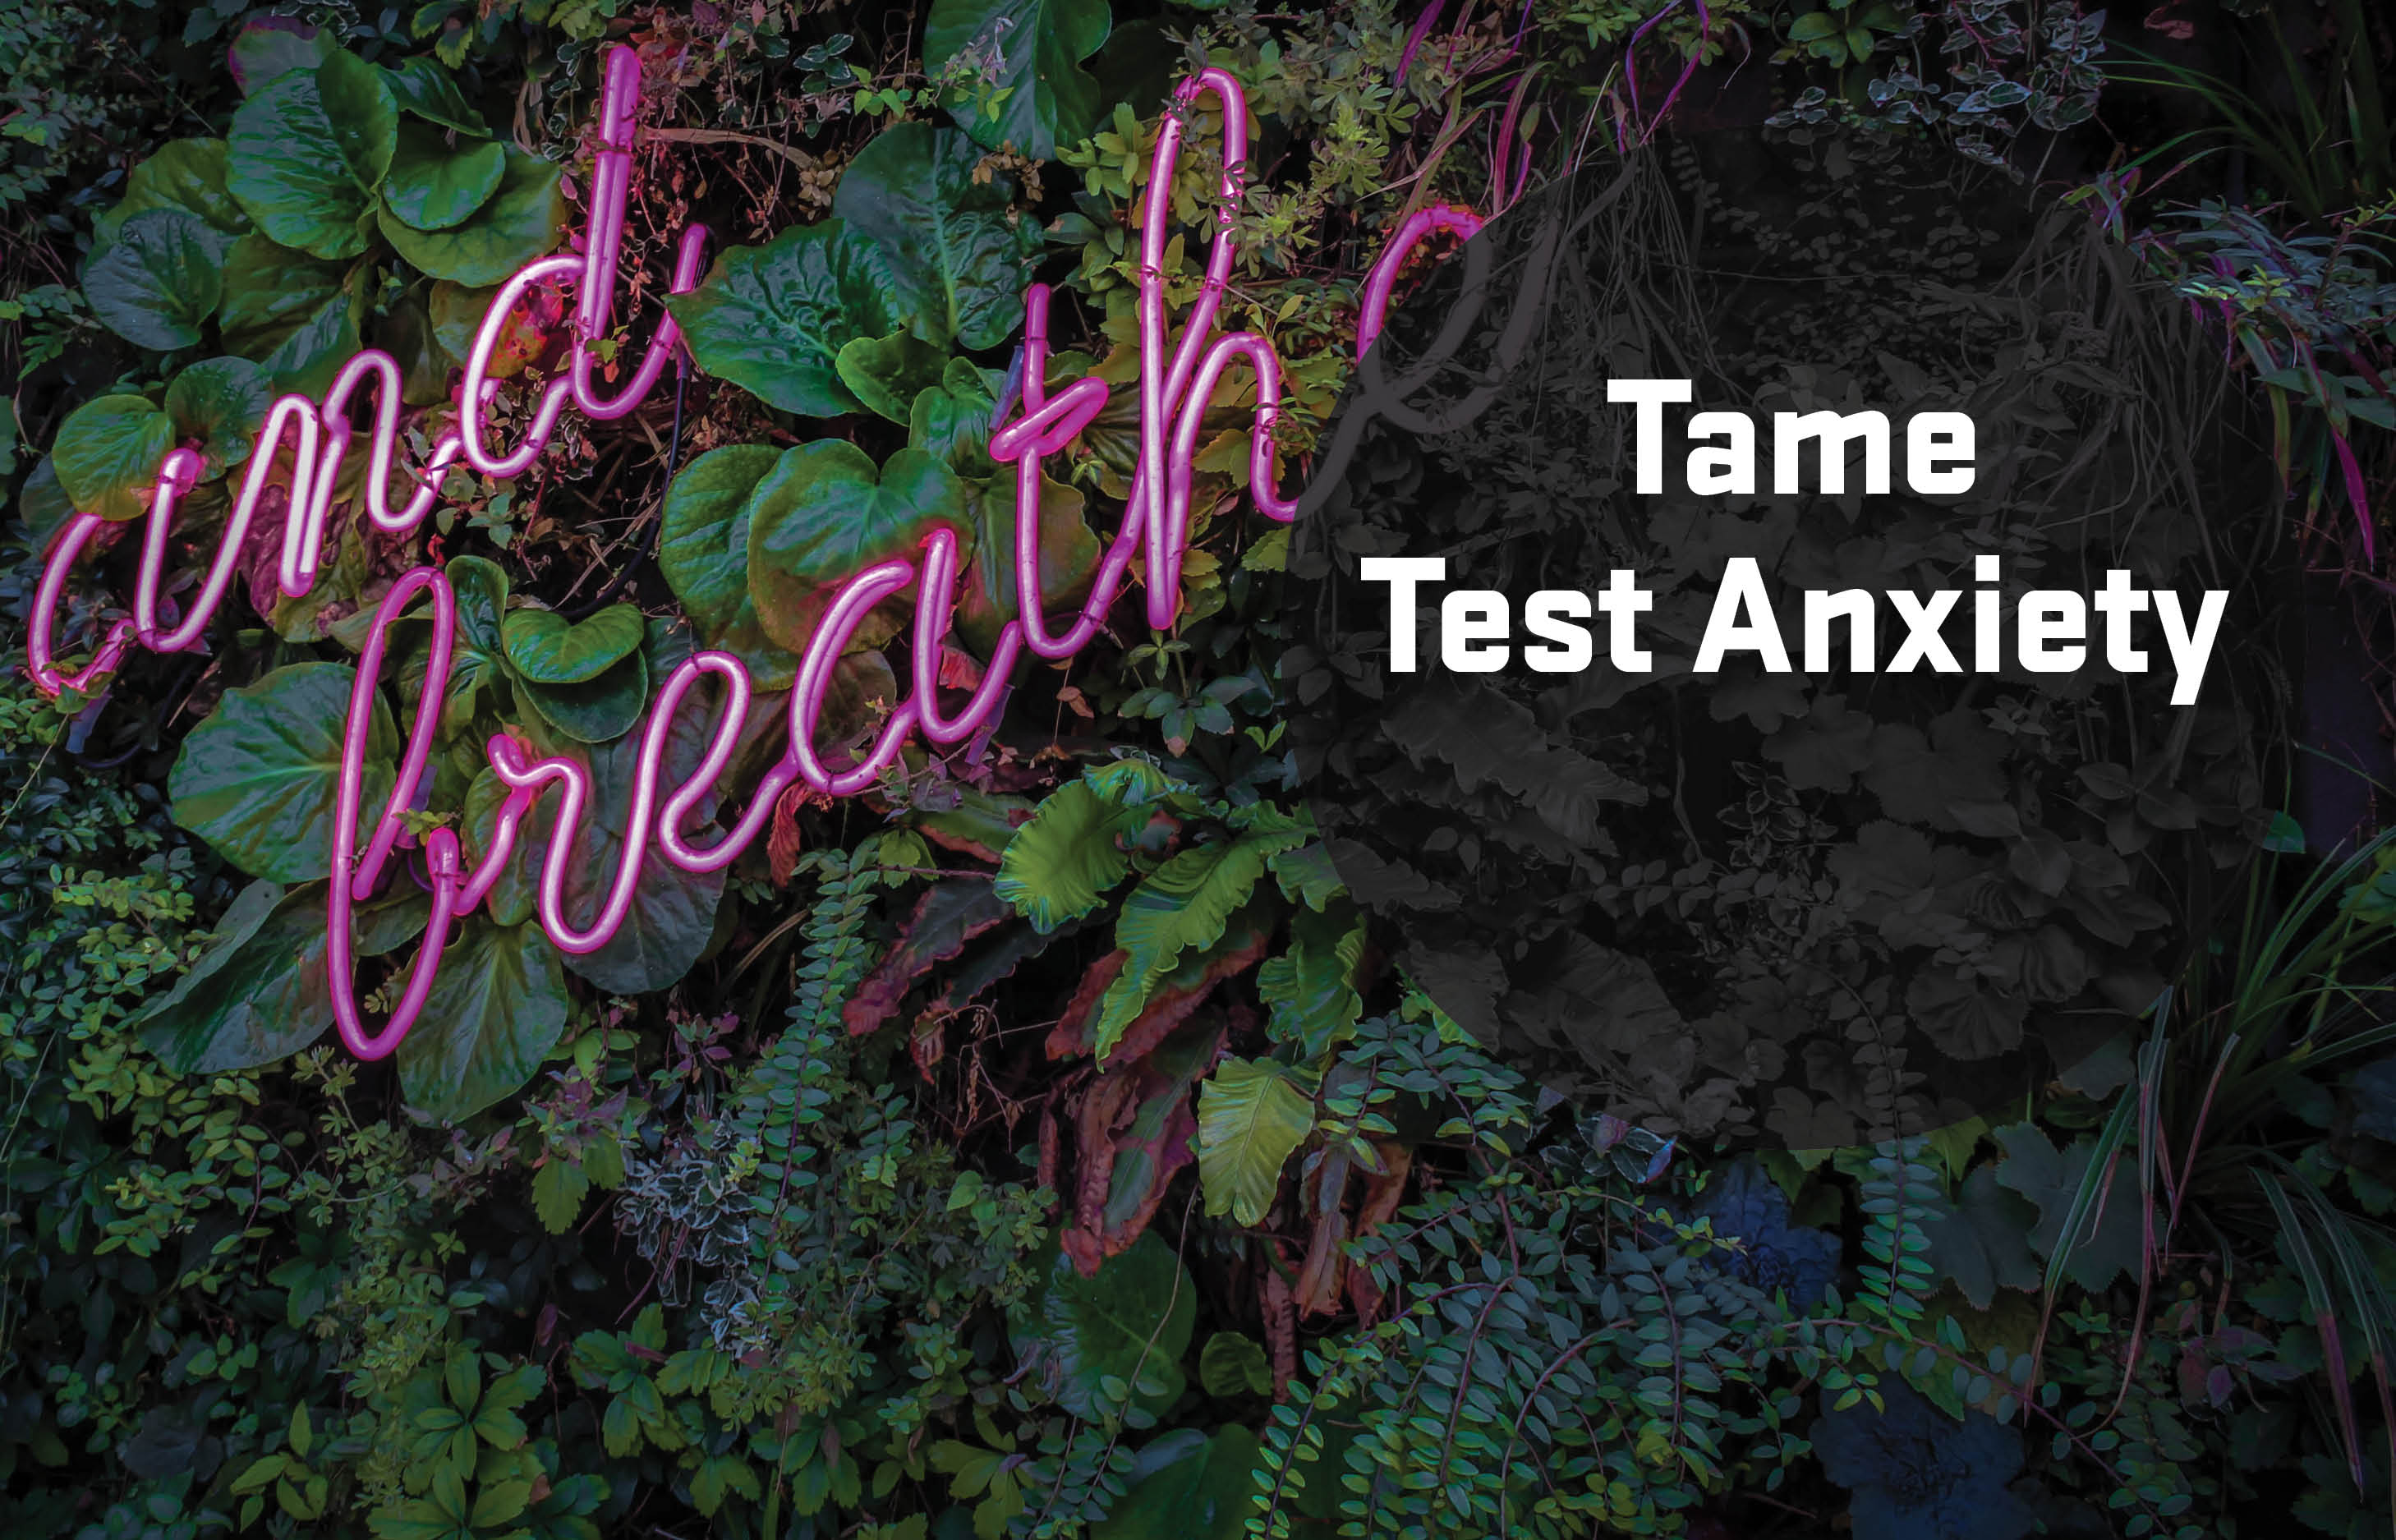 taming test anxiety